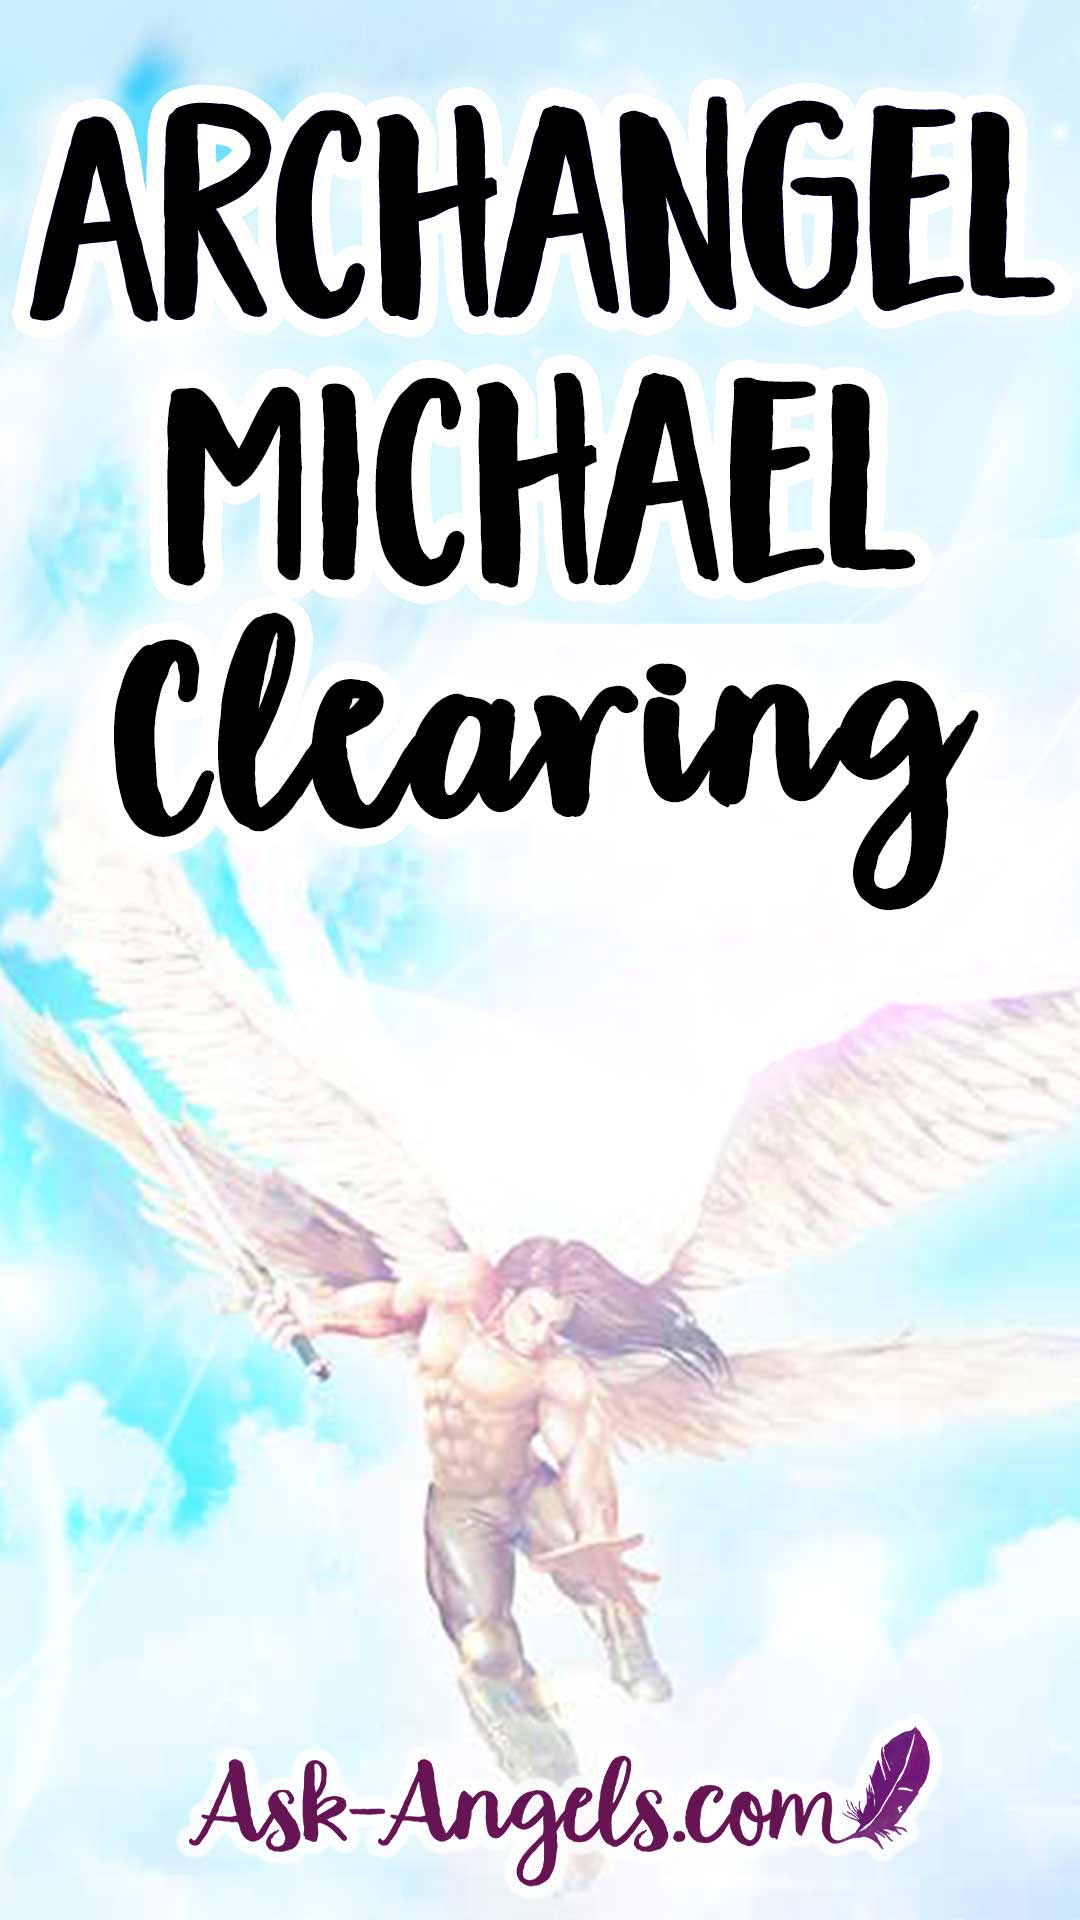 Archangel Michael Clearing